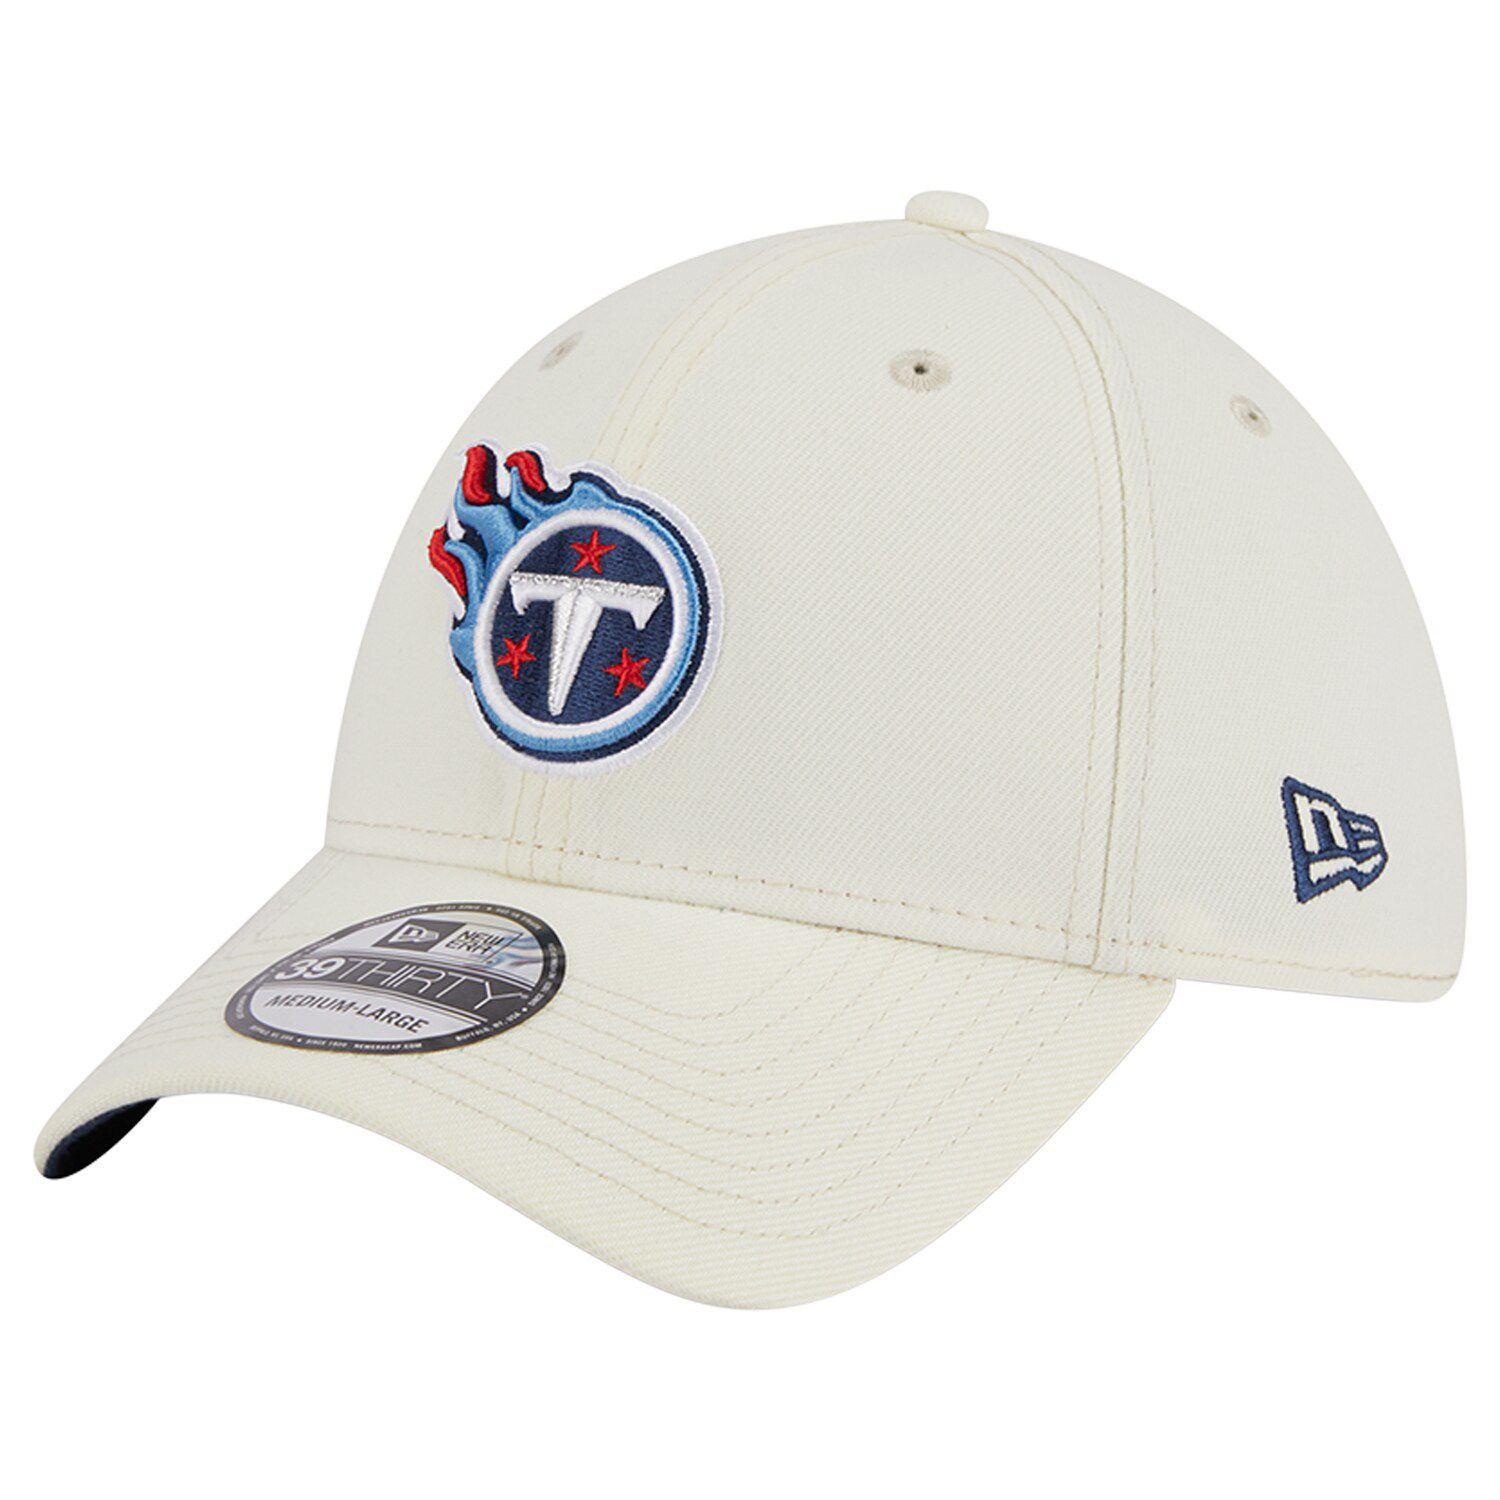 NEW Tennessee Titans Men's New Era NFL Crucial Catch 39THIRTY